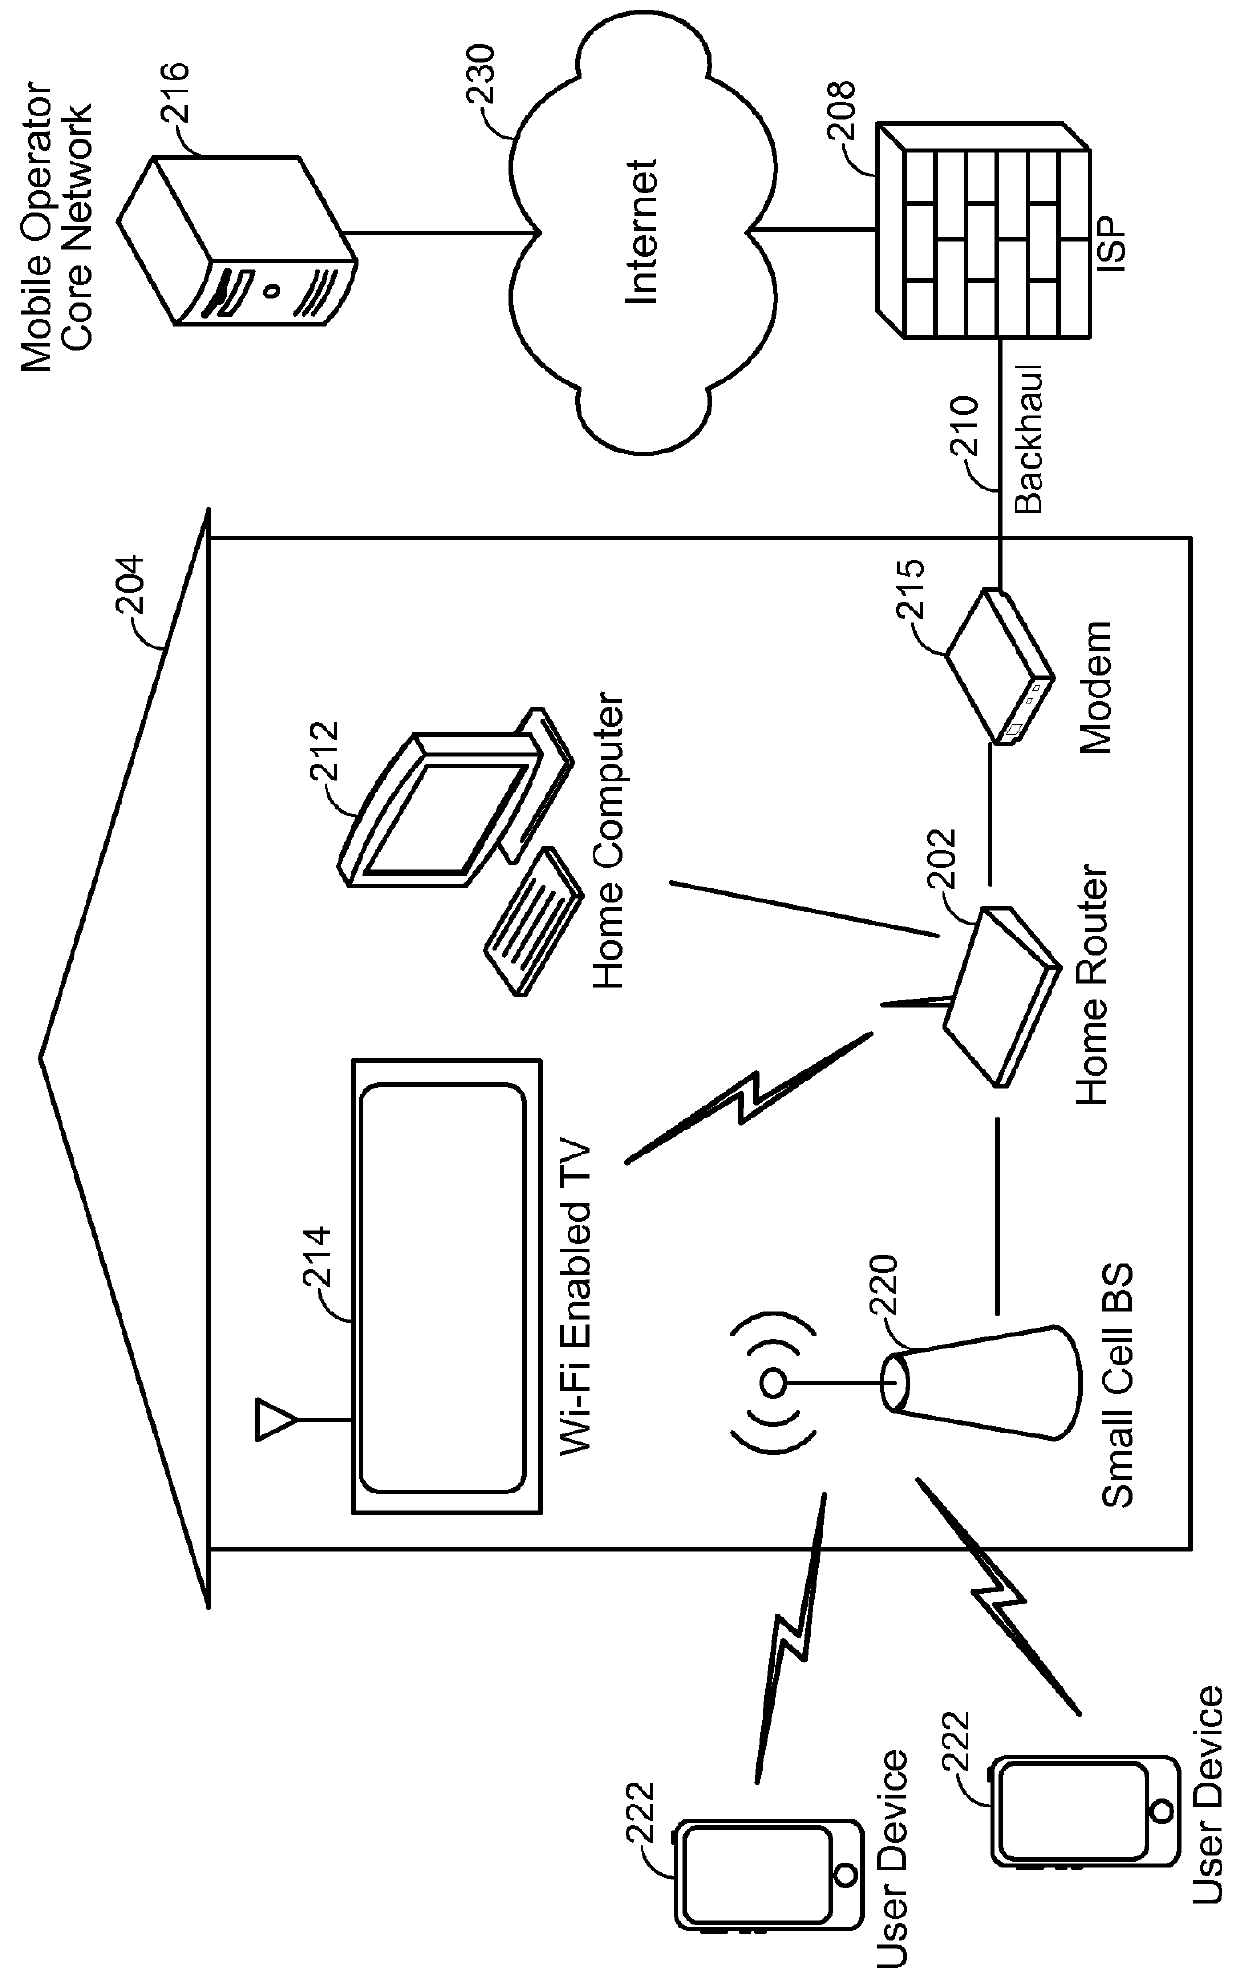 Cson-aided small cell load balancing based on backhaul information